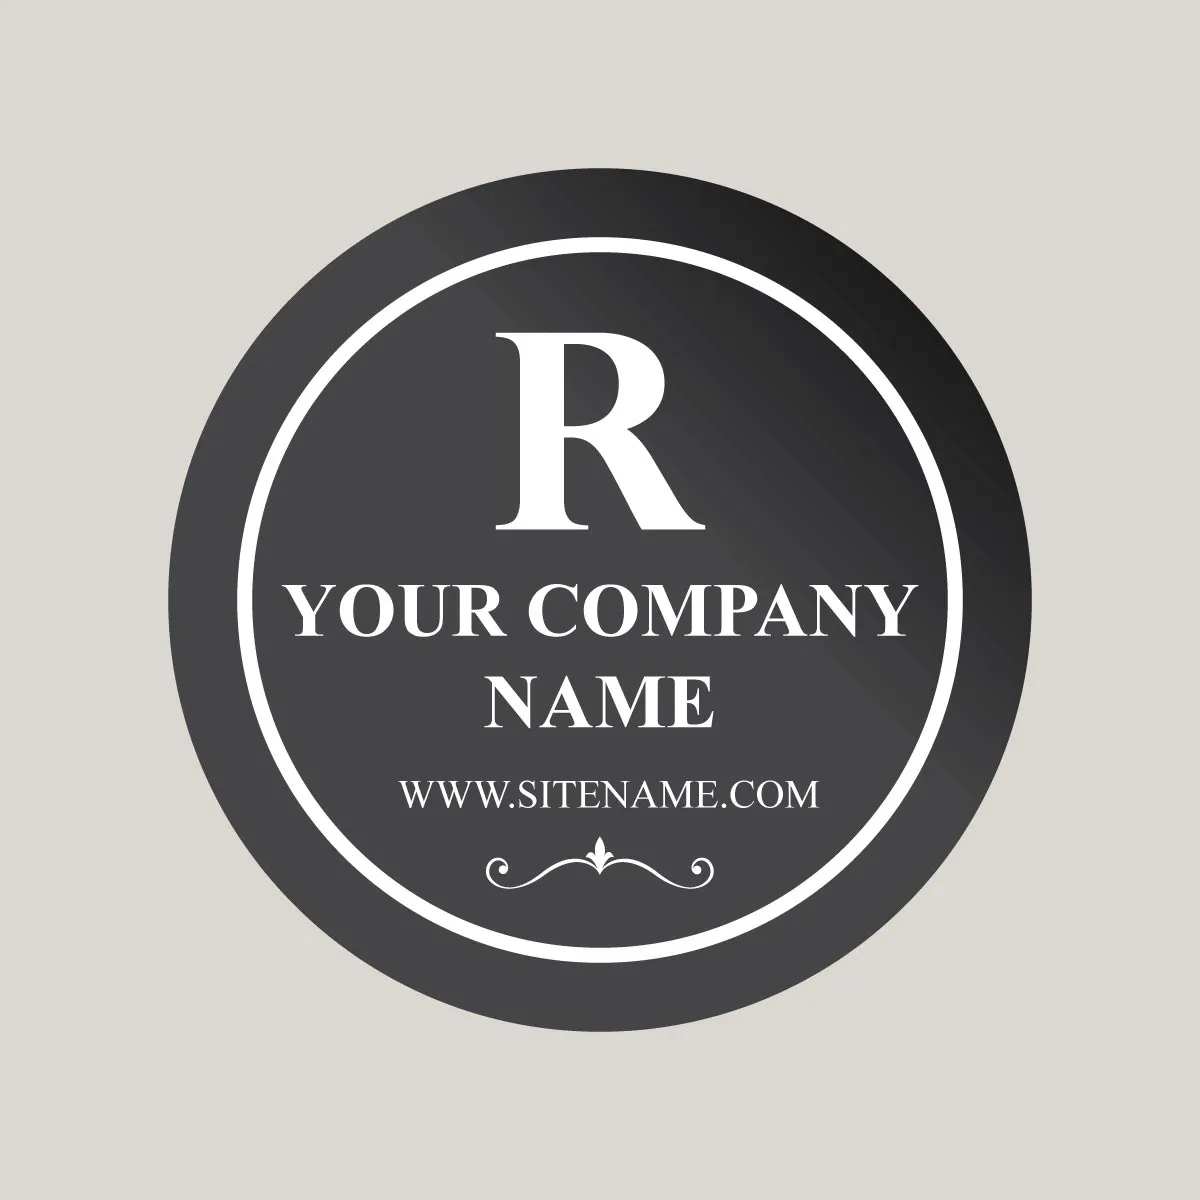 Company Logo Stickers - Custom Stickers and Labels